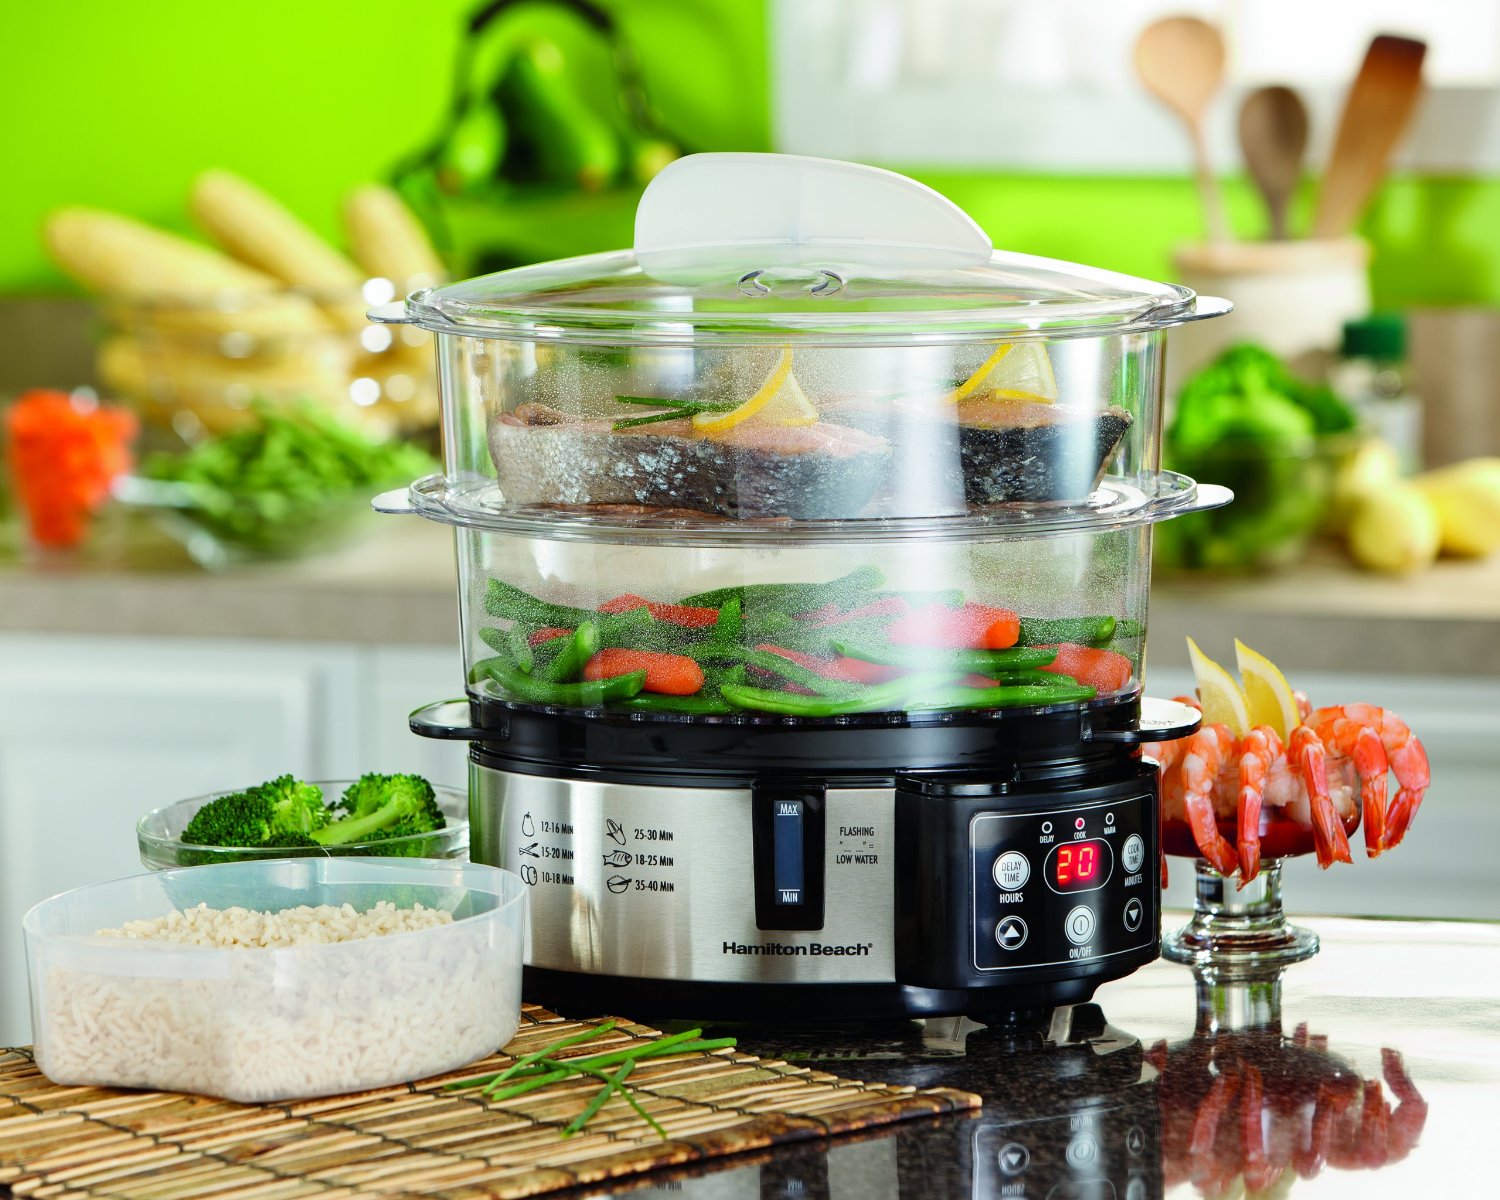 Cozeemax 3 Tier Electric Food Steamer with for Cooking, Programmable 13.7QT Vegetable  Steamer for Fast Simultaneous Cooking, Auto Shutoff & Boil Dry Protection